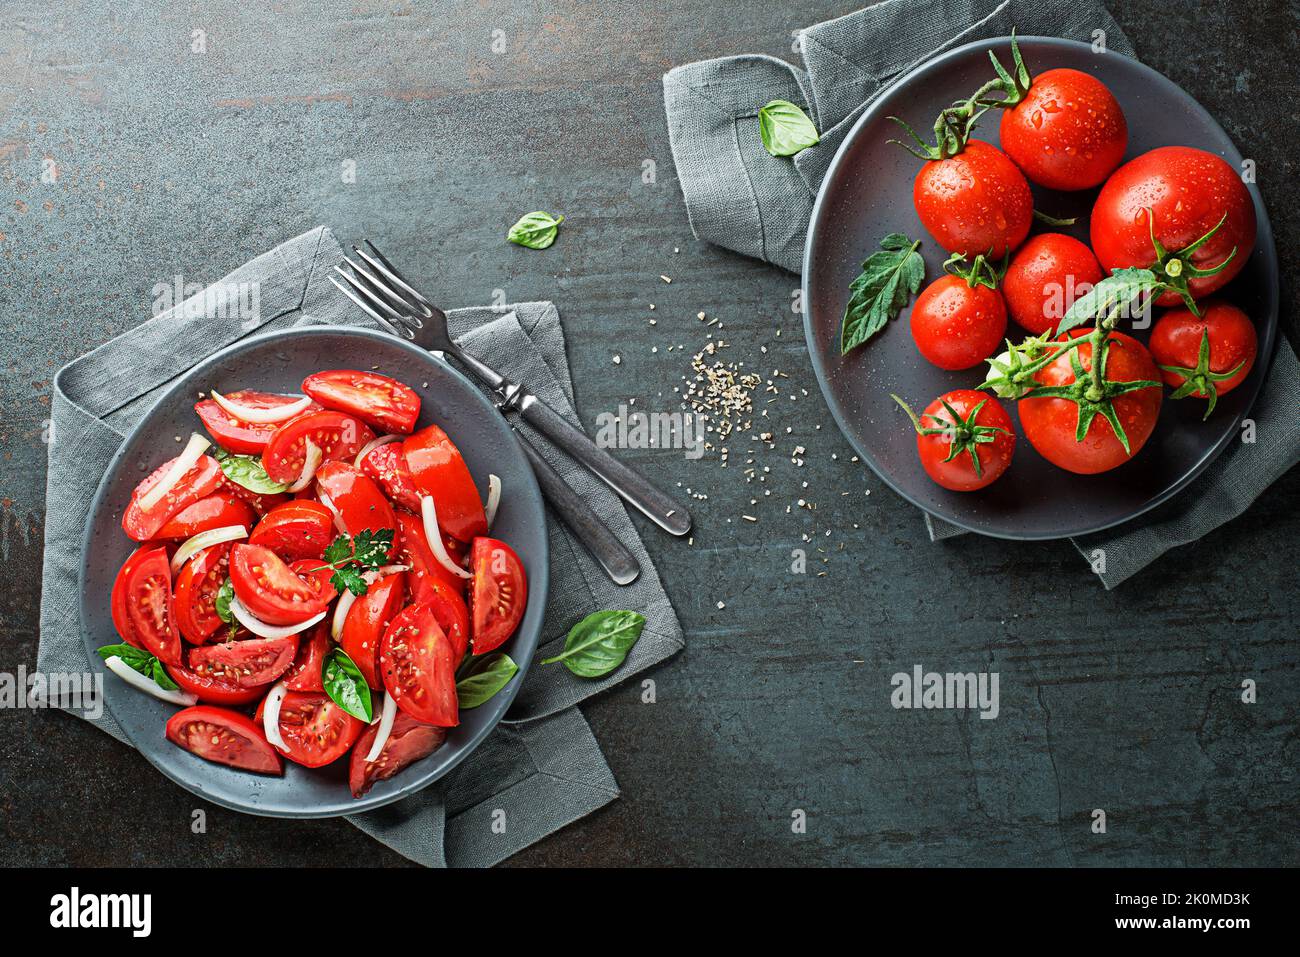 Fresh tomato salad with onion and herbs on a grey table background. Concept for a tasty and healthy meal Stock Photo